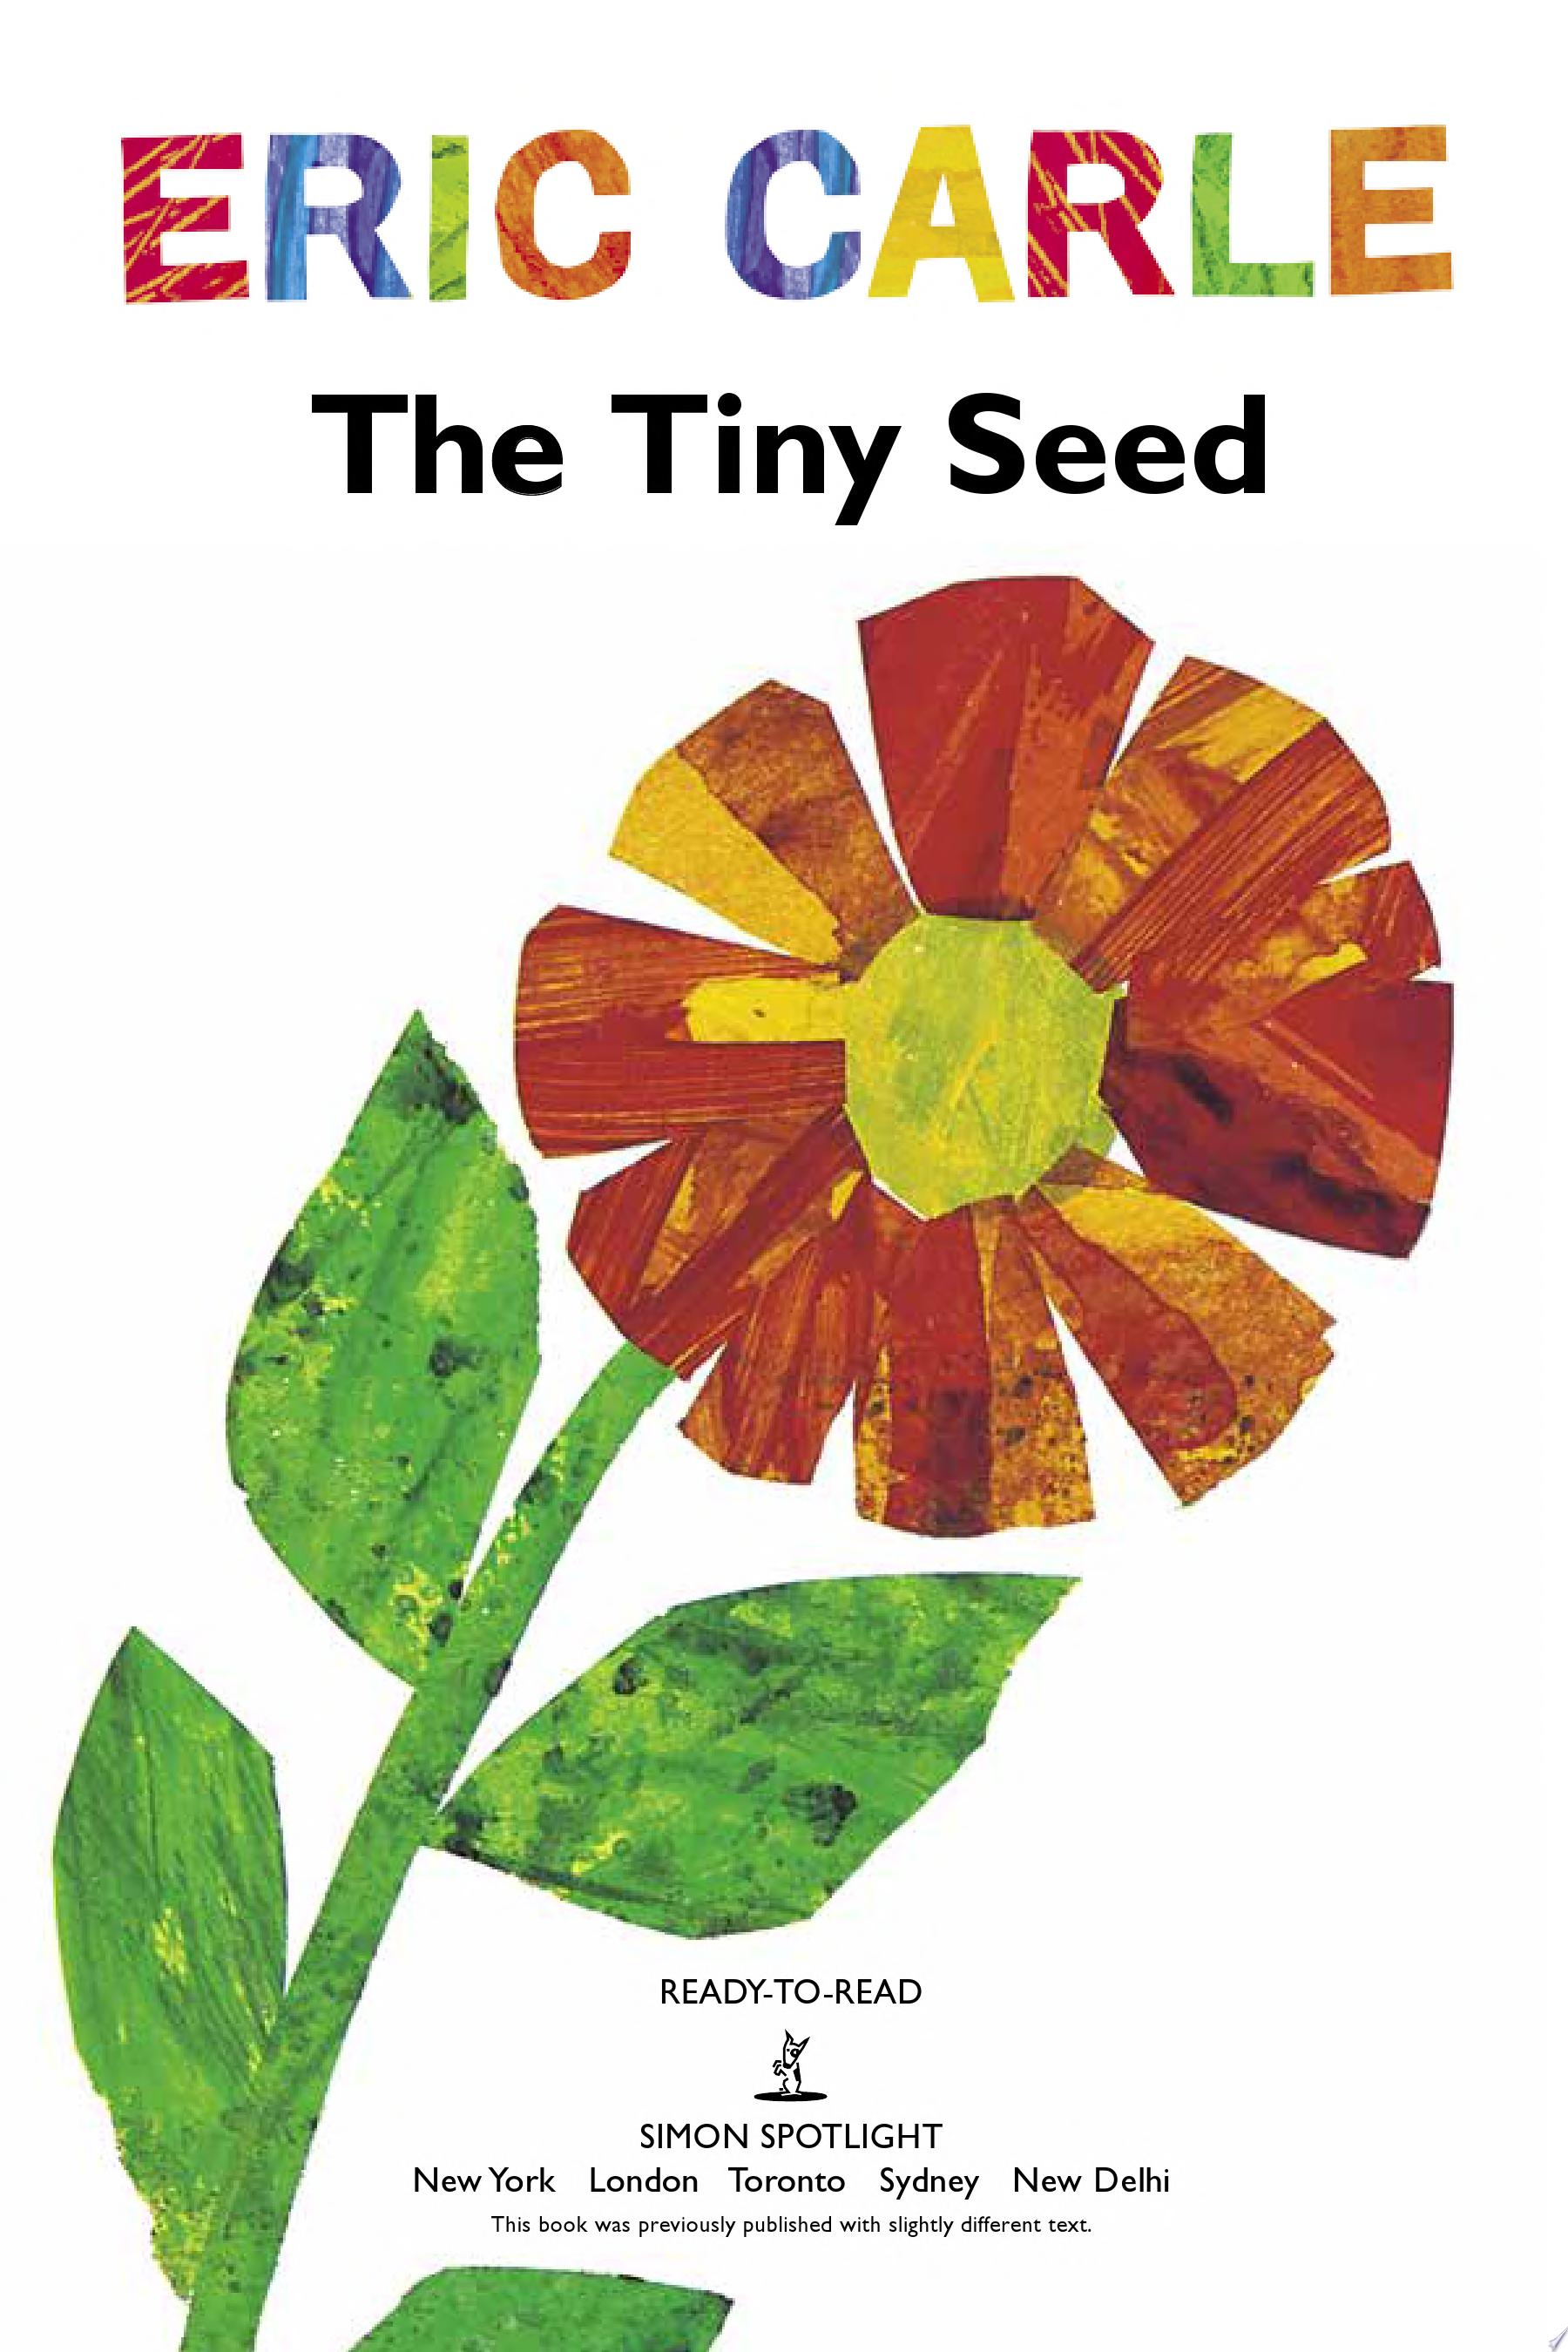 Image for "The Tiny Seed"